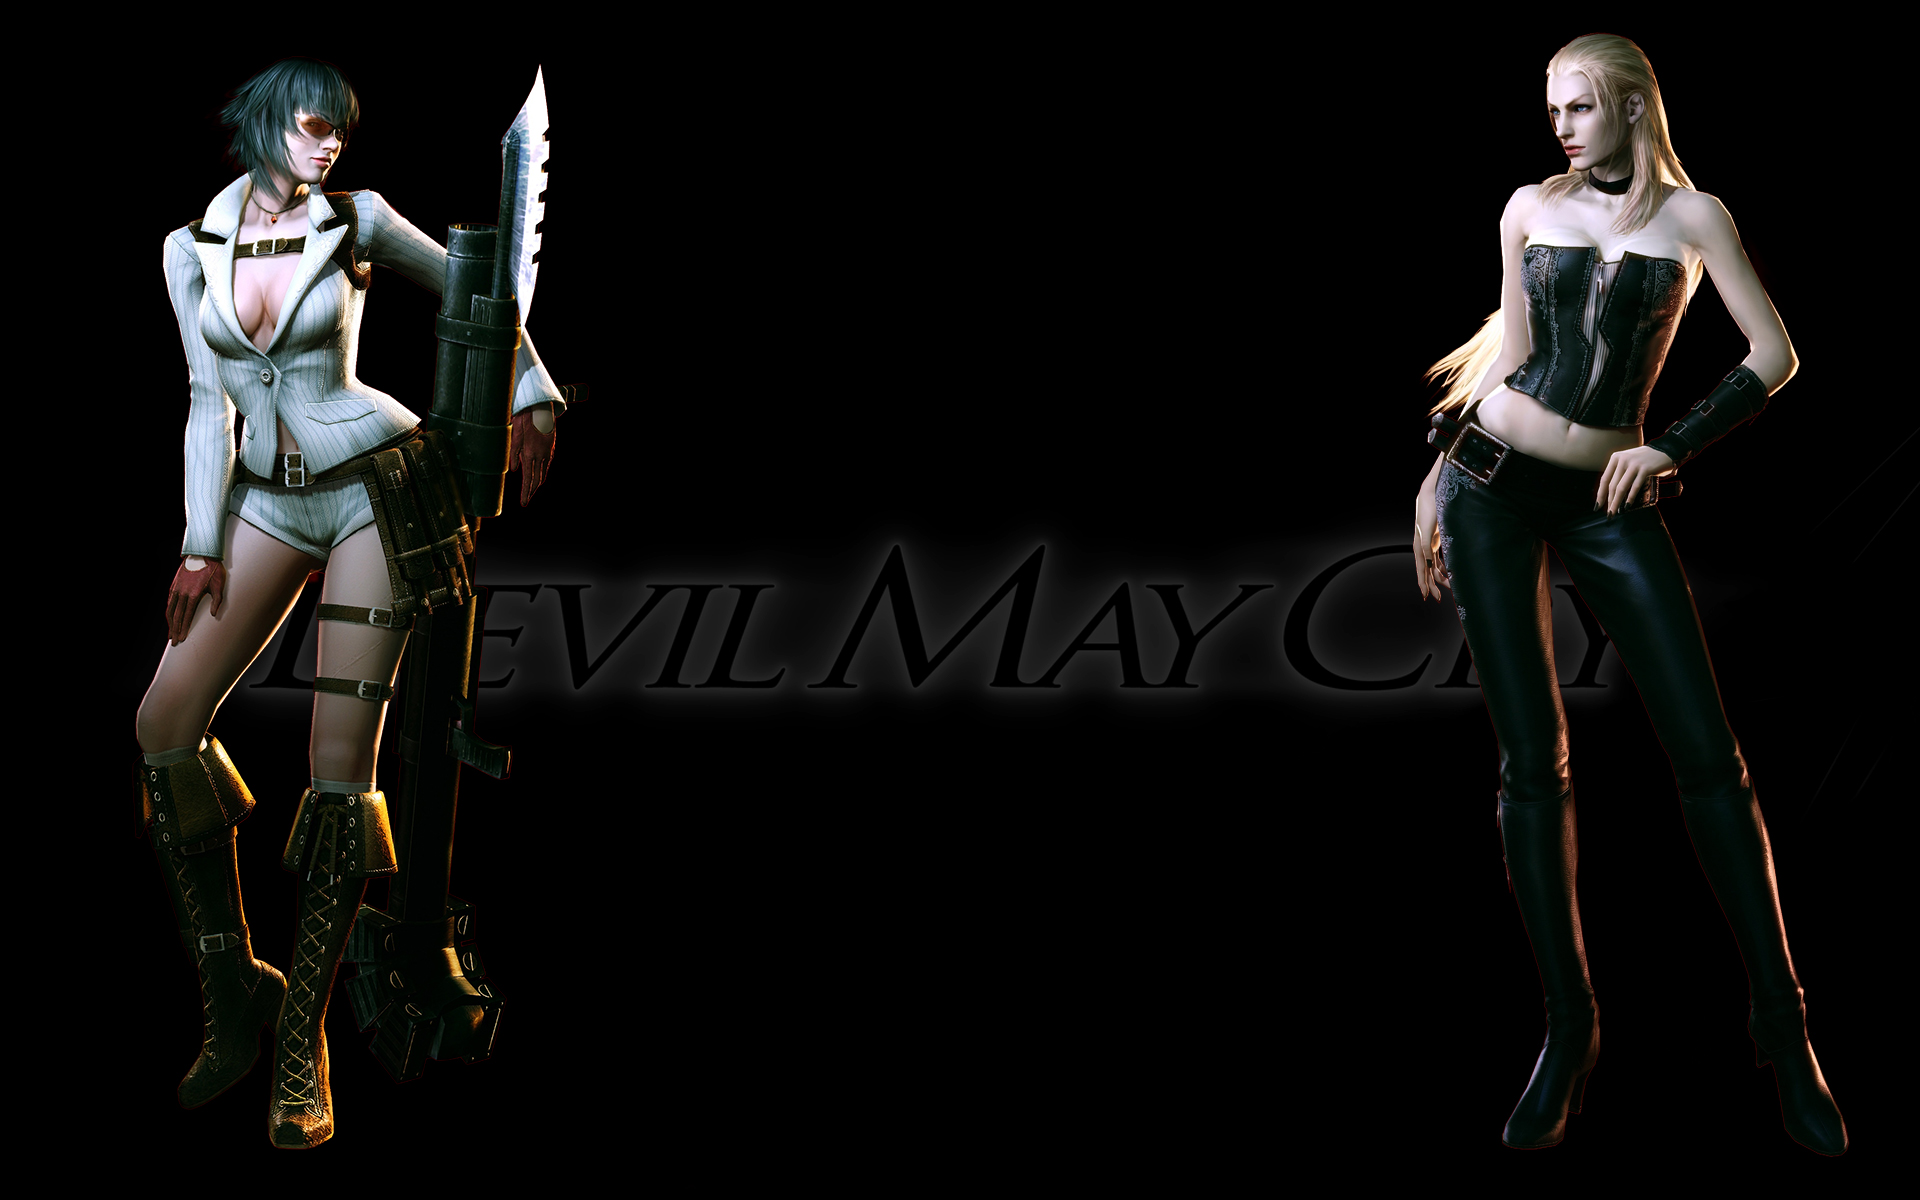 Devil May Cry, Trish Devil May Cry, Lady (character) - desktop wallpaper